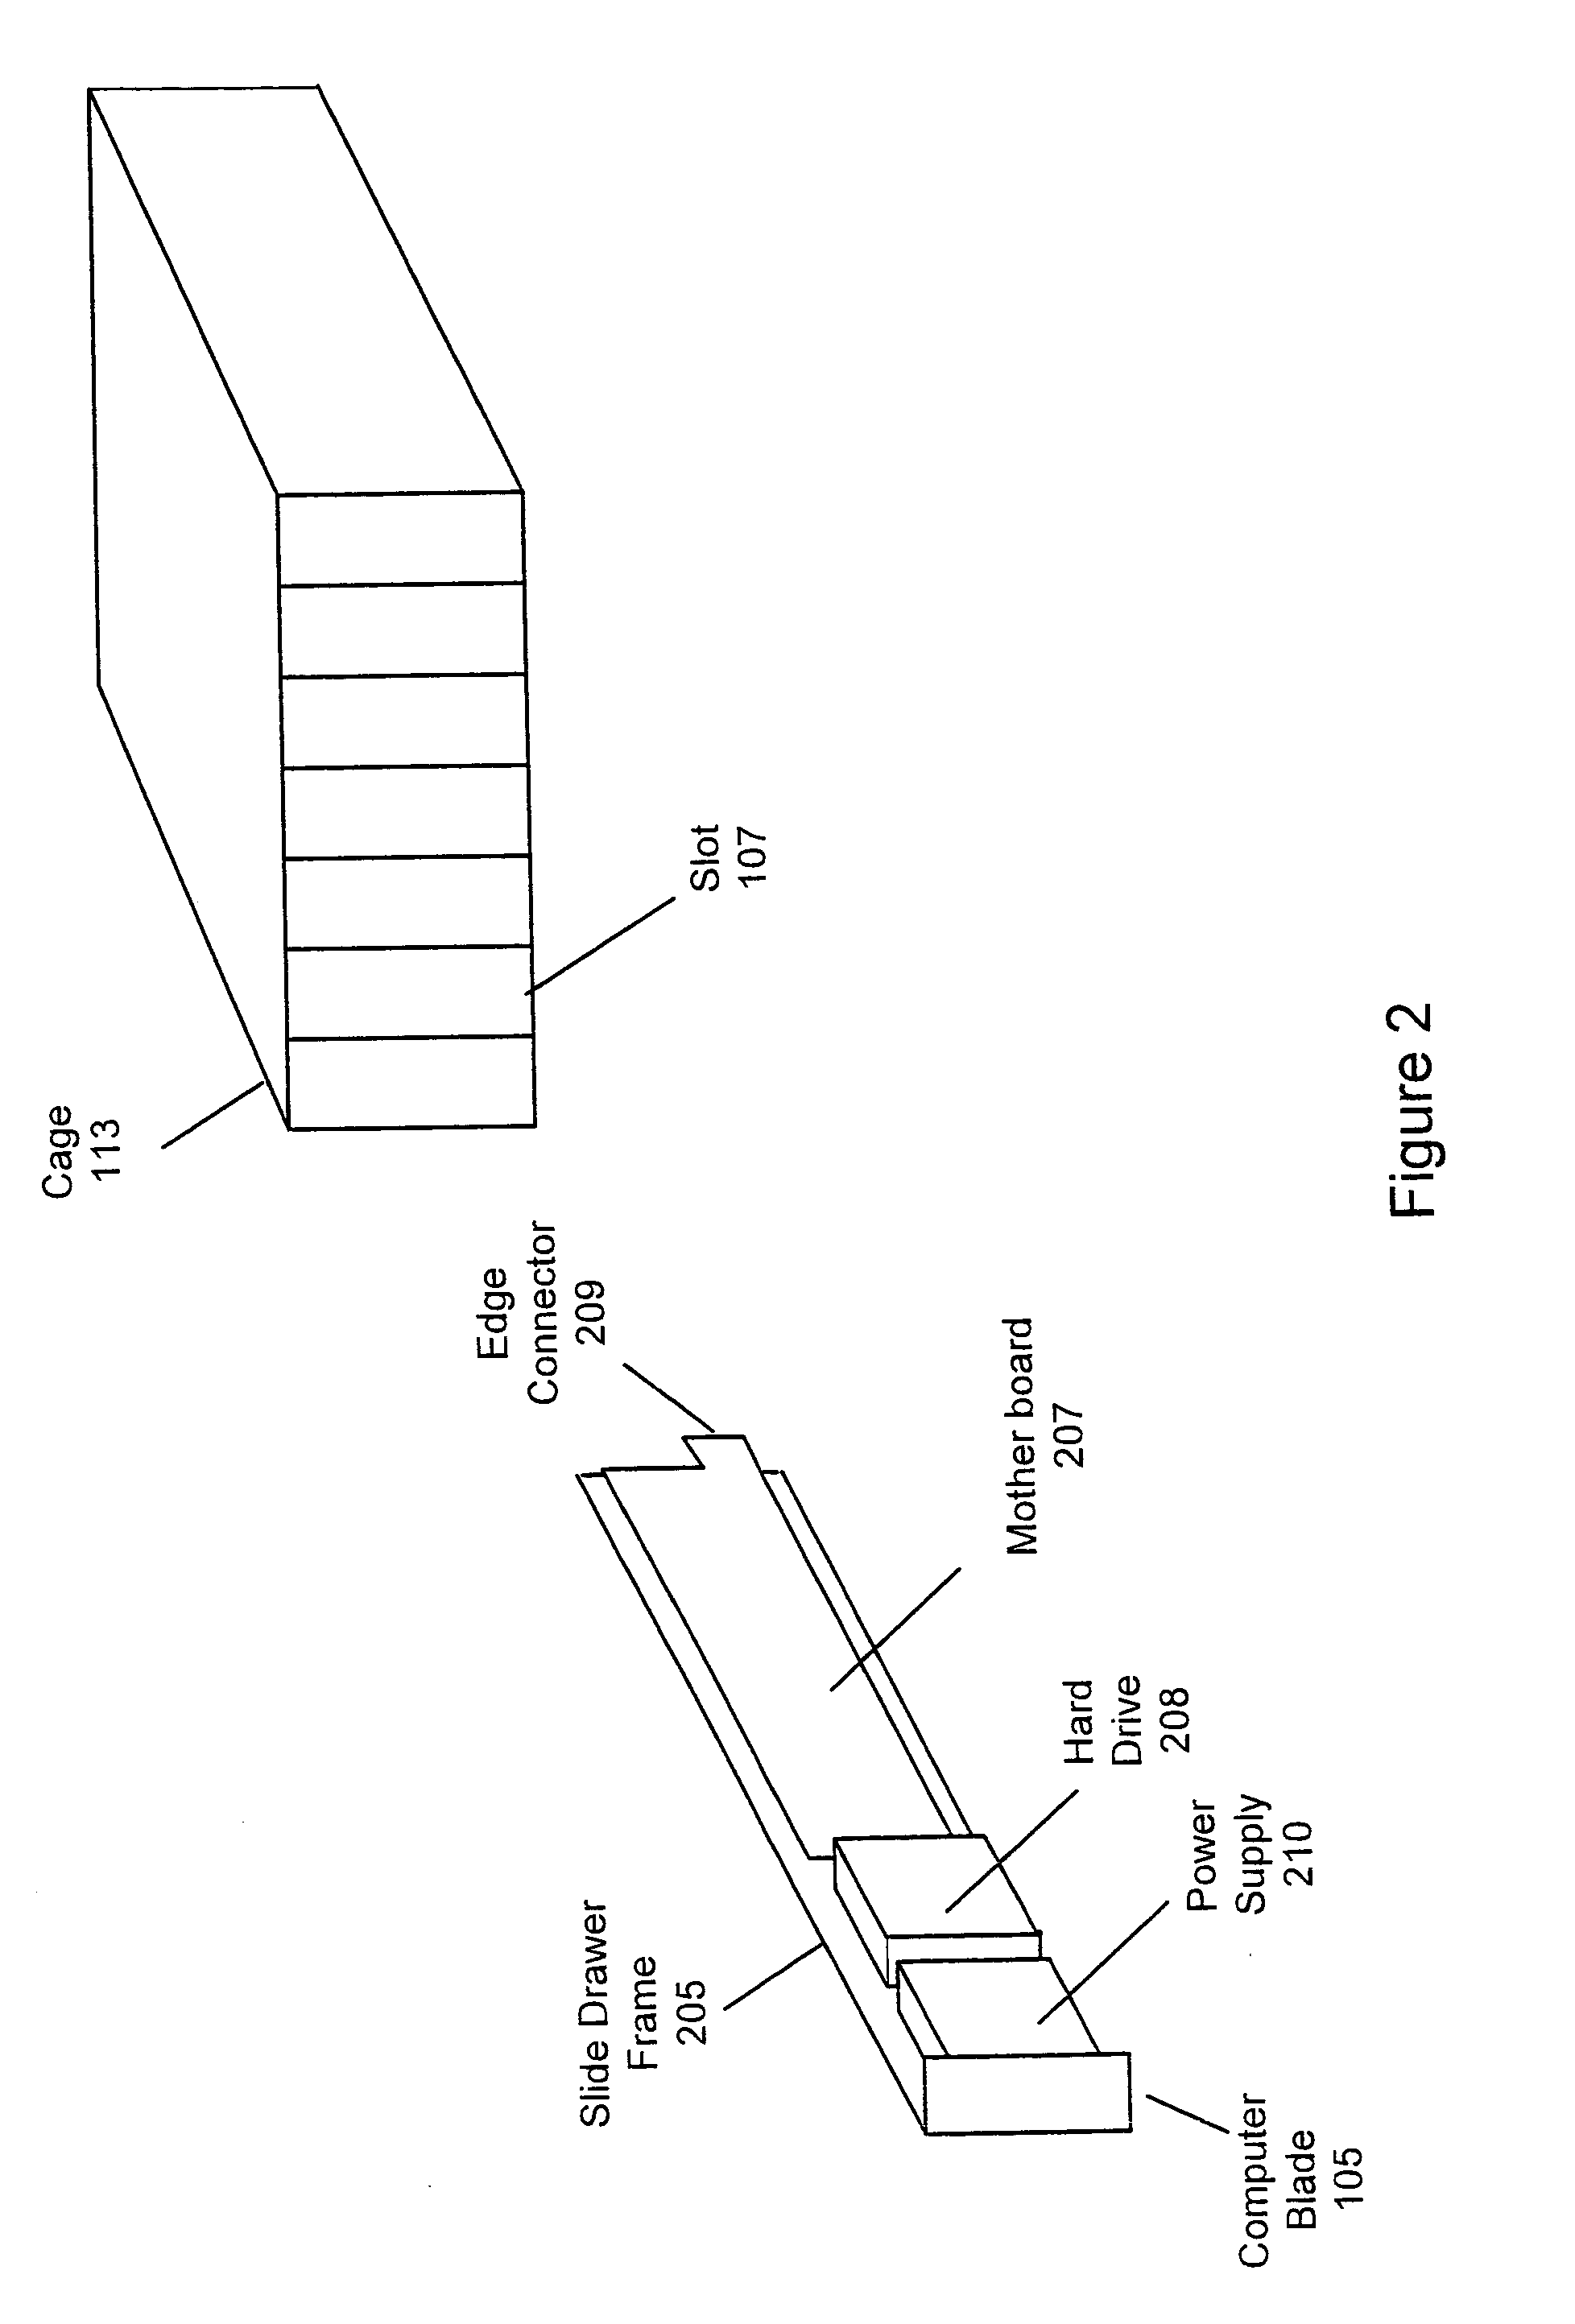 System and method for automatic software retrieval on a peer-to-peer network